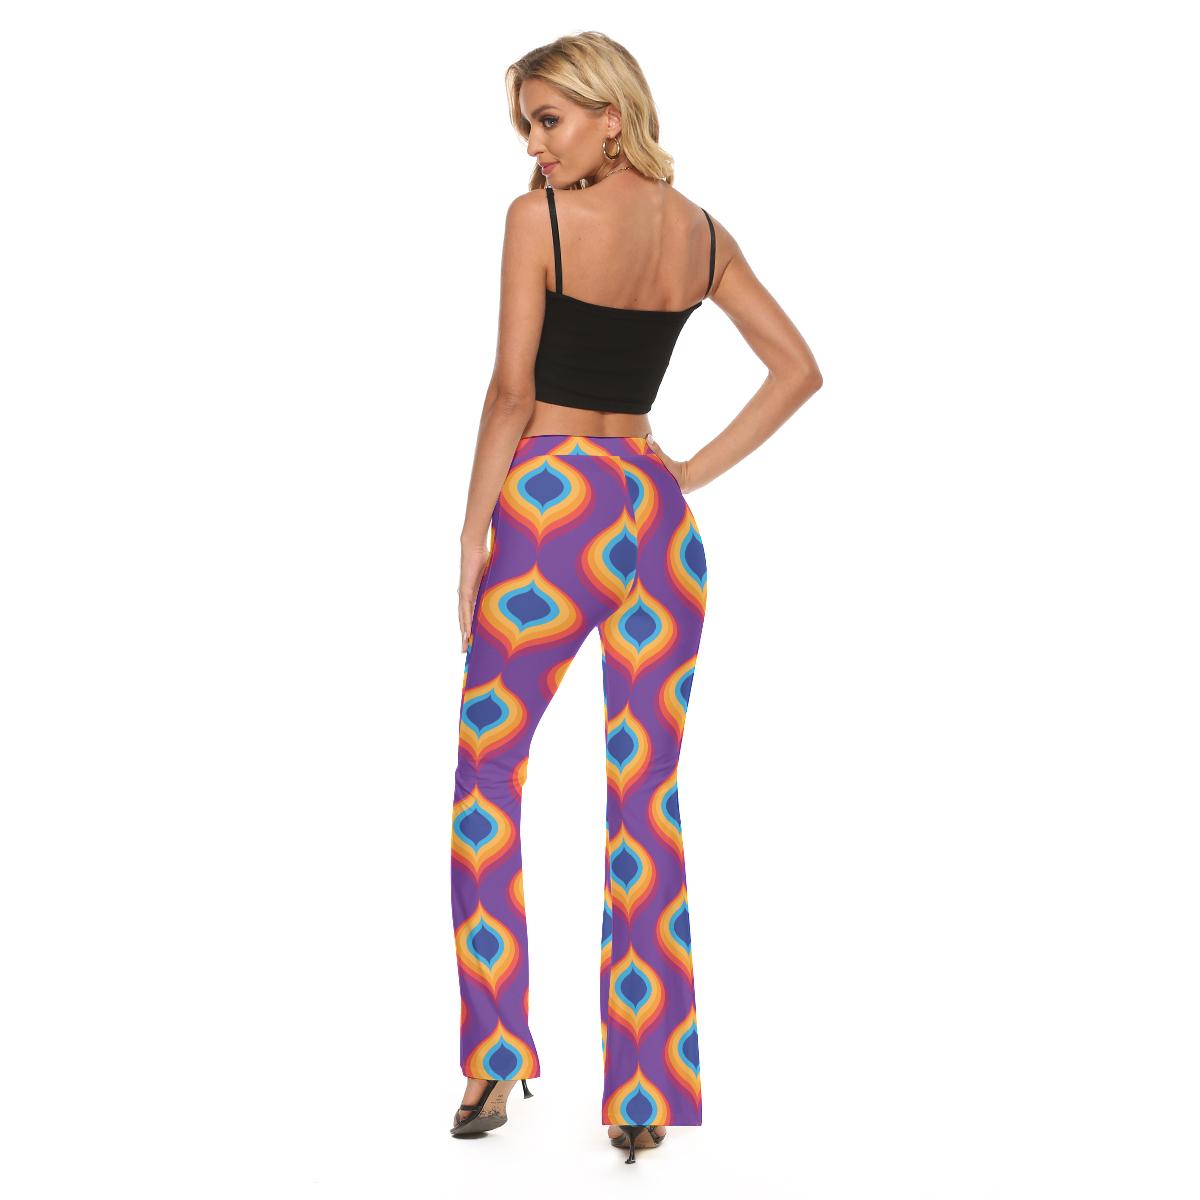 Shop Striped Seventies Flare Pants, Retro Vintage Style Bell Bottoms